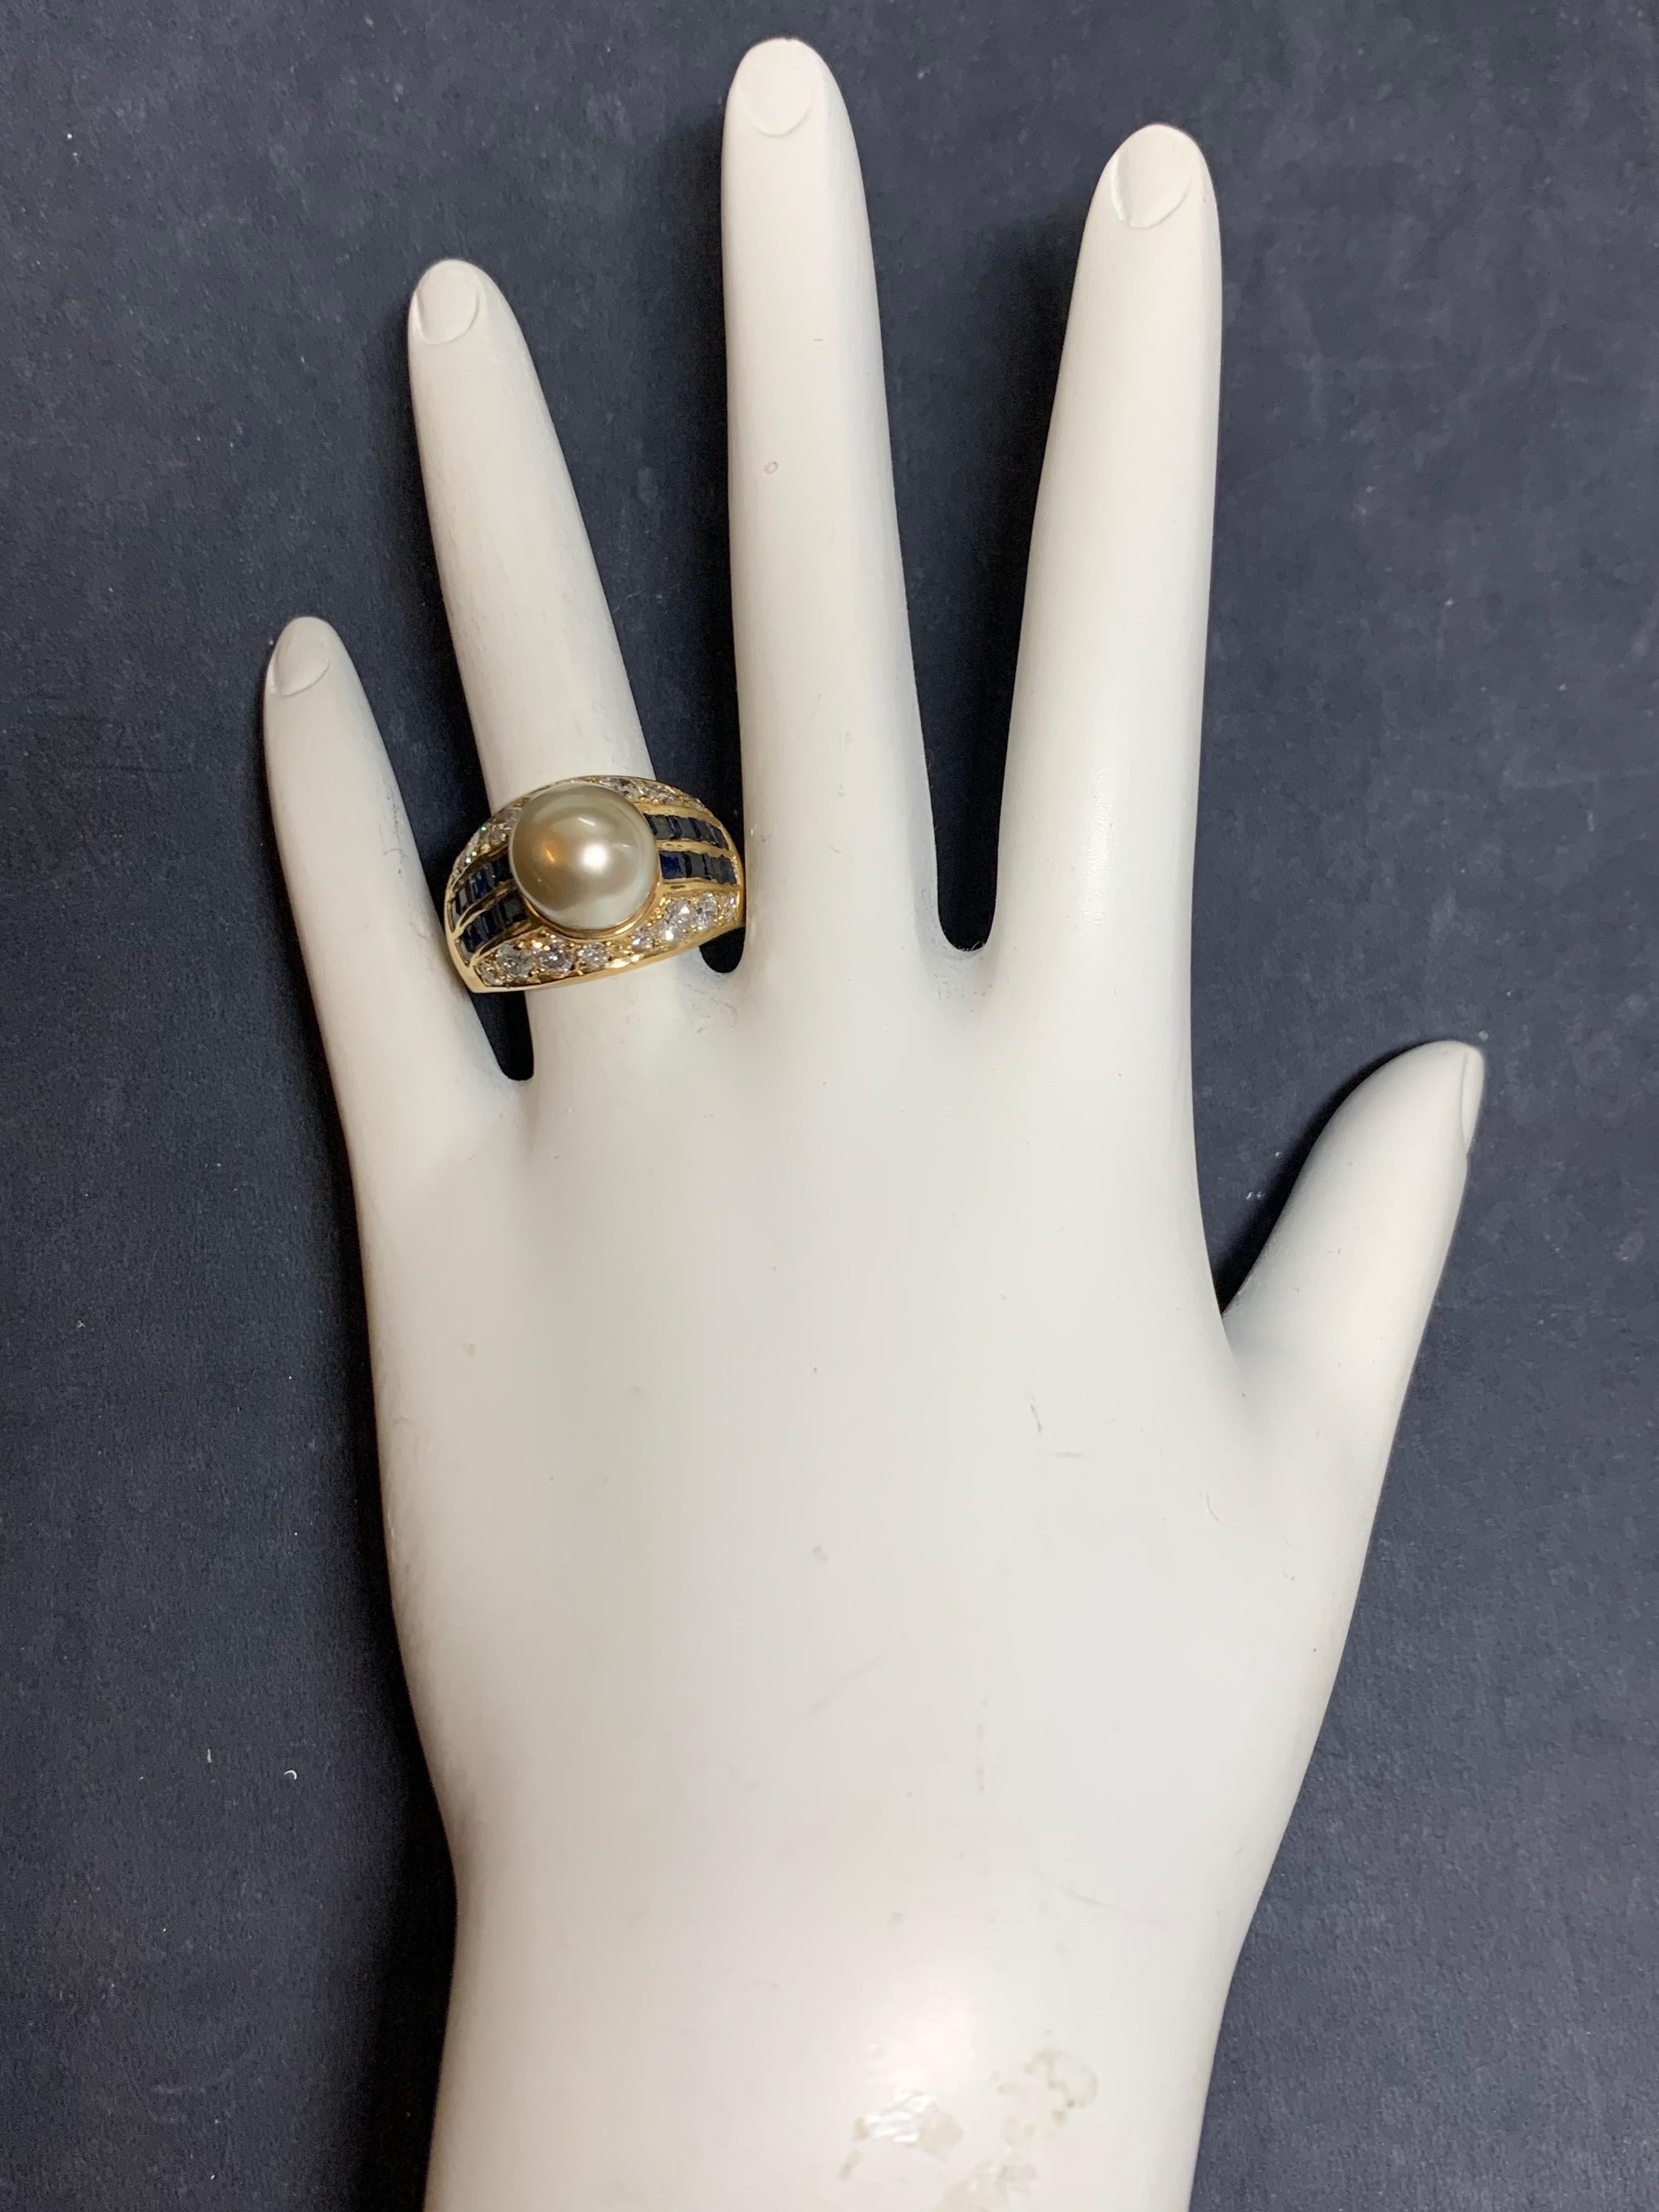 Retro 14k Yellow Gold Ring set with 2.50 Carat (approximate) Natural Diamonds, Sapphires & a 10mm Pearl.

The ring is set with 16 natural colorless VS round brilliant diamonds weighing approximately 1 carat. It is also set with 16 natural square